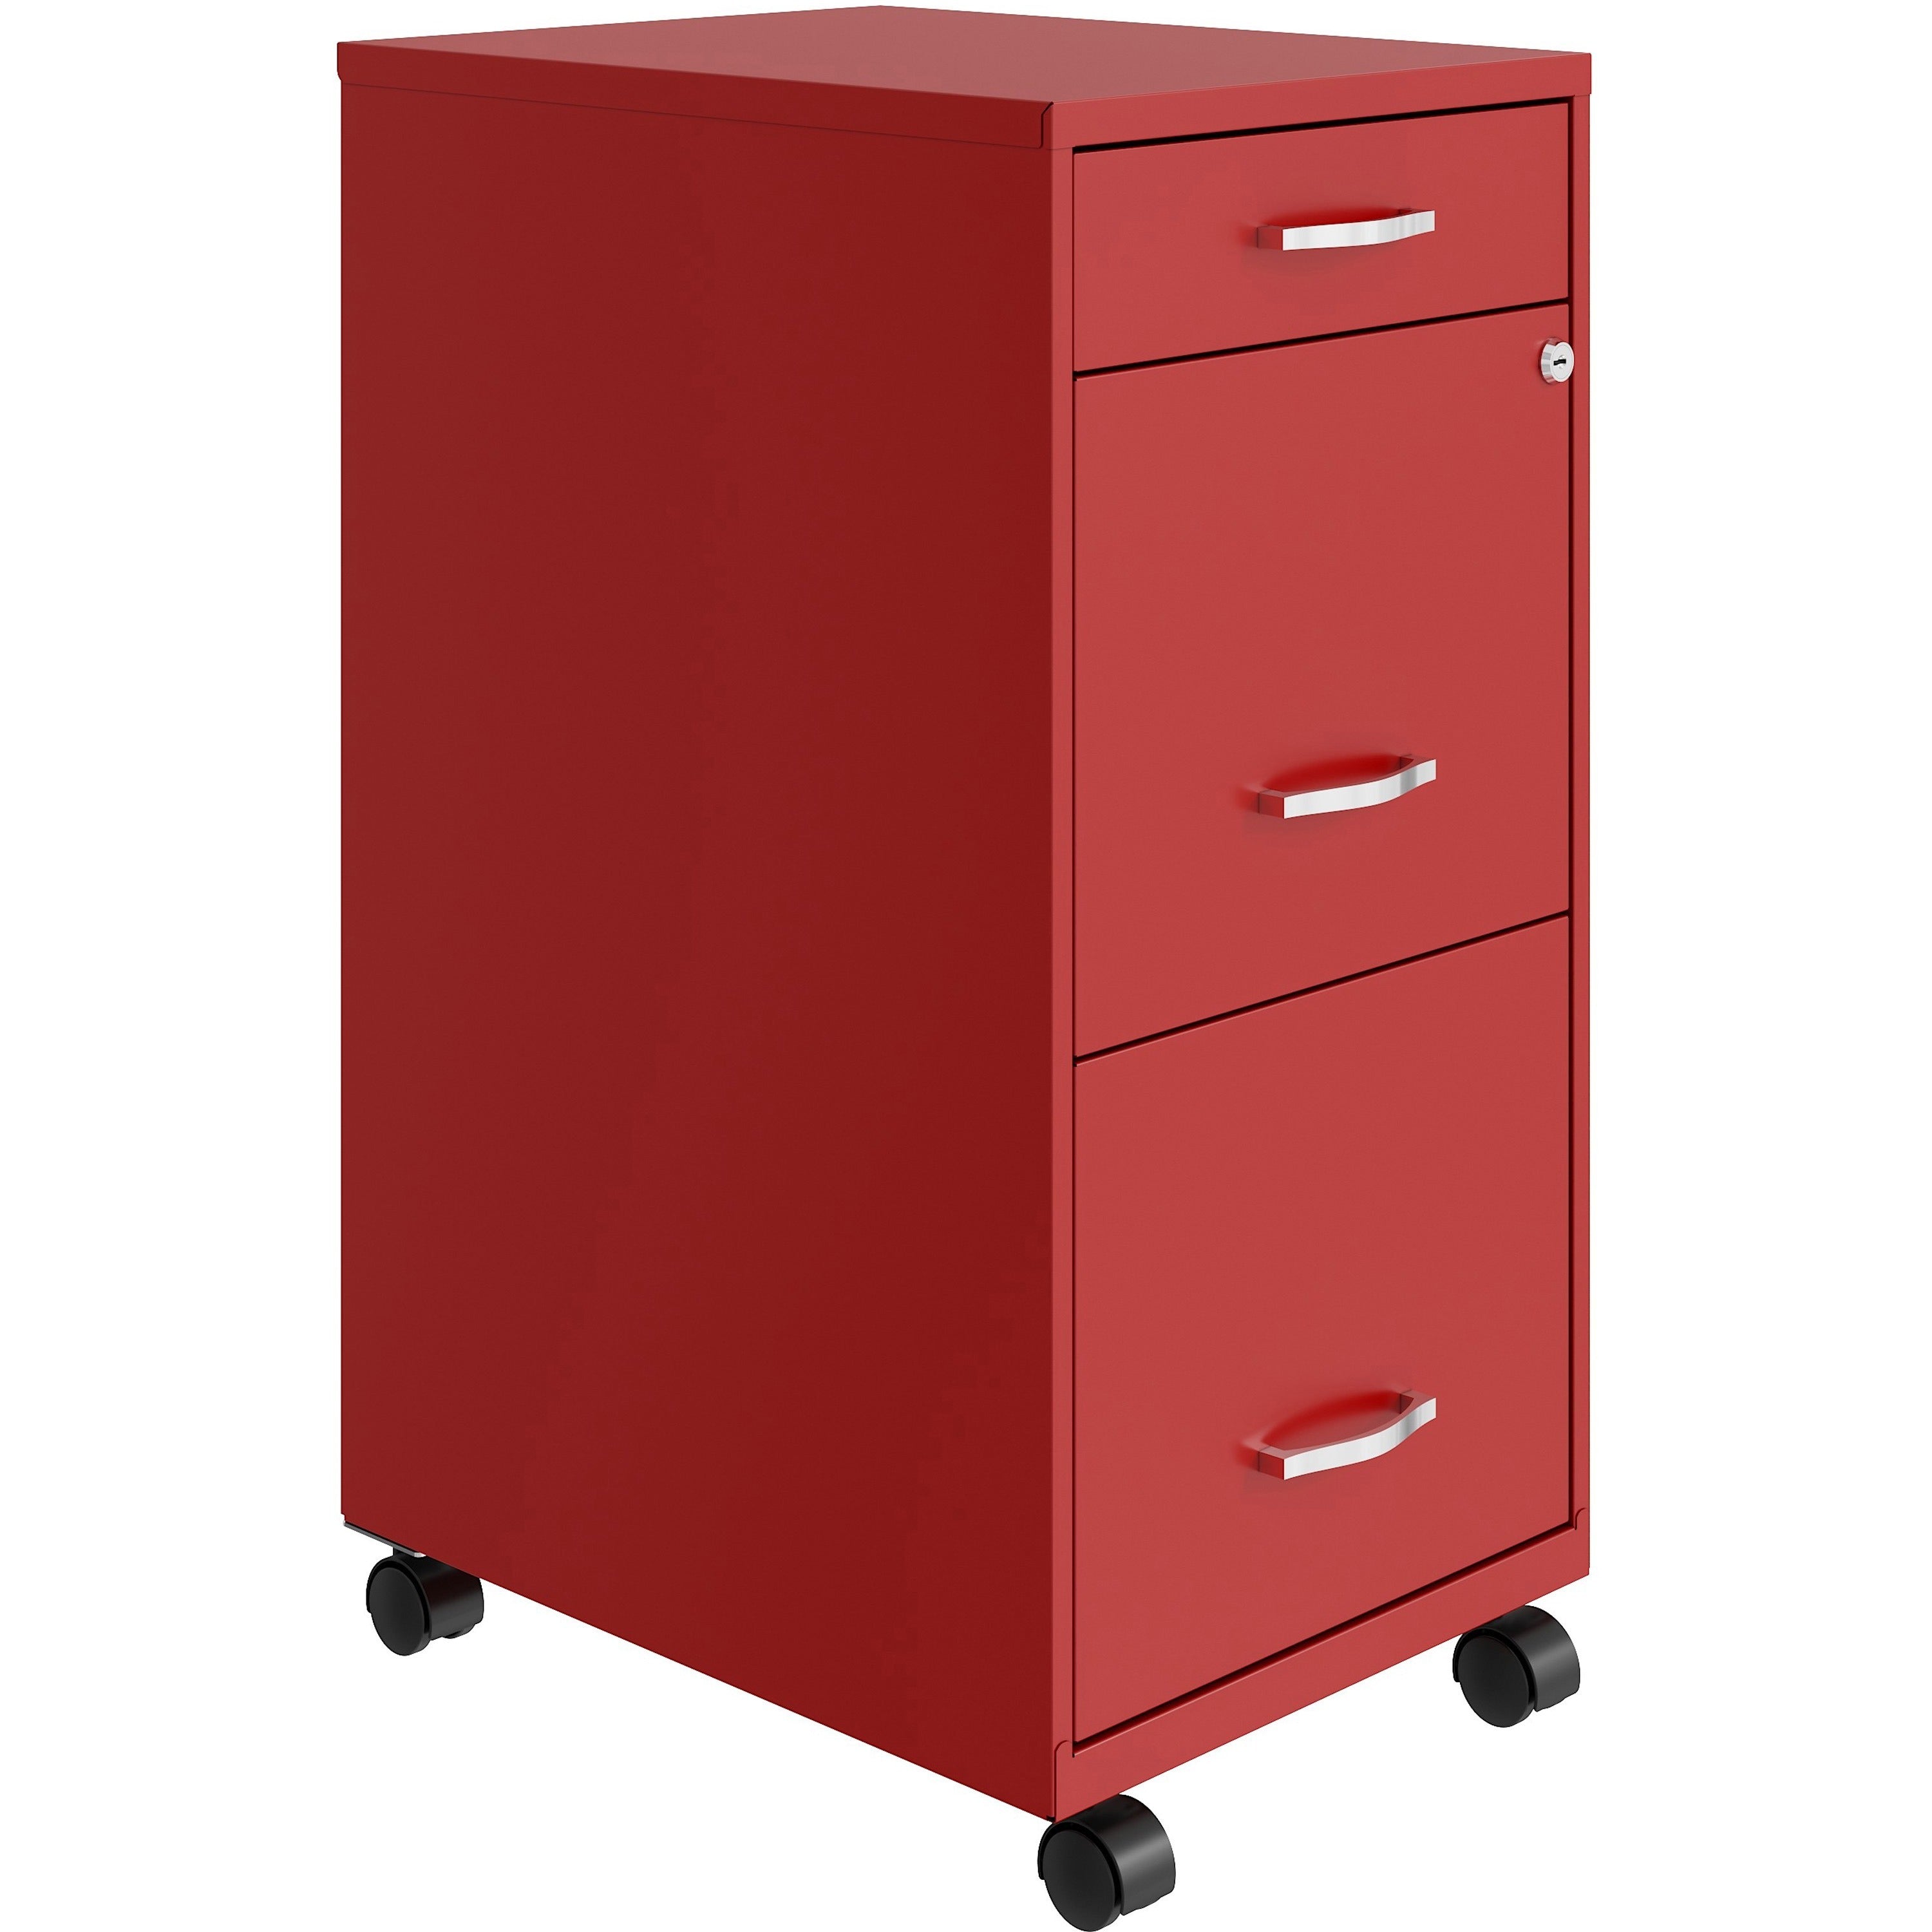 nusparc-mobile-file-cabinet-142-x-18-x-295-3-x-drawers-for-file-box-letter-mobility-locking-drawer-glide-suspension-3-4-drawer-extension-cam-lock-nonporous-surface-red-painted-steel-recycled_nprvf318bmrd - 1